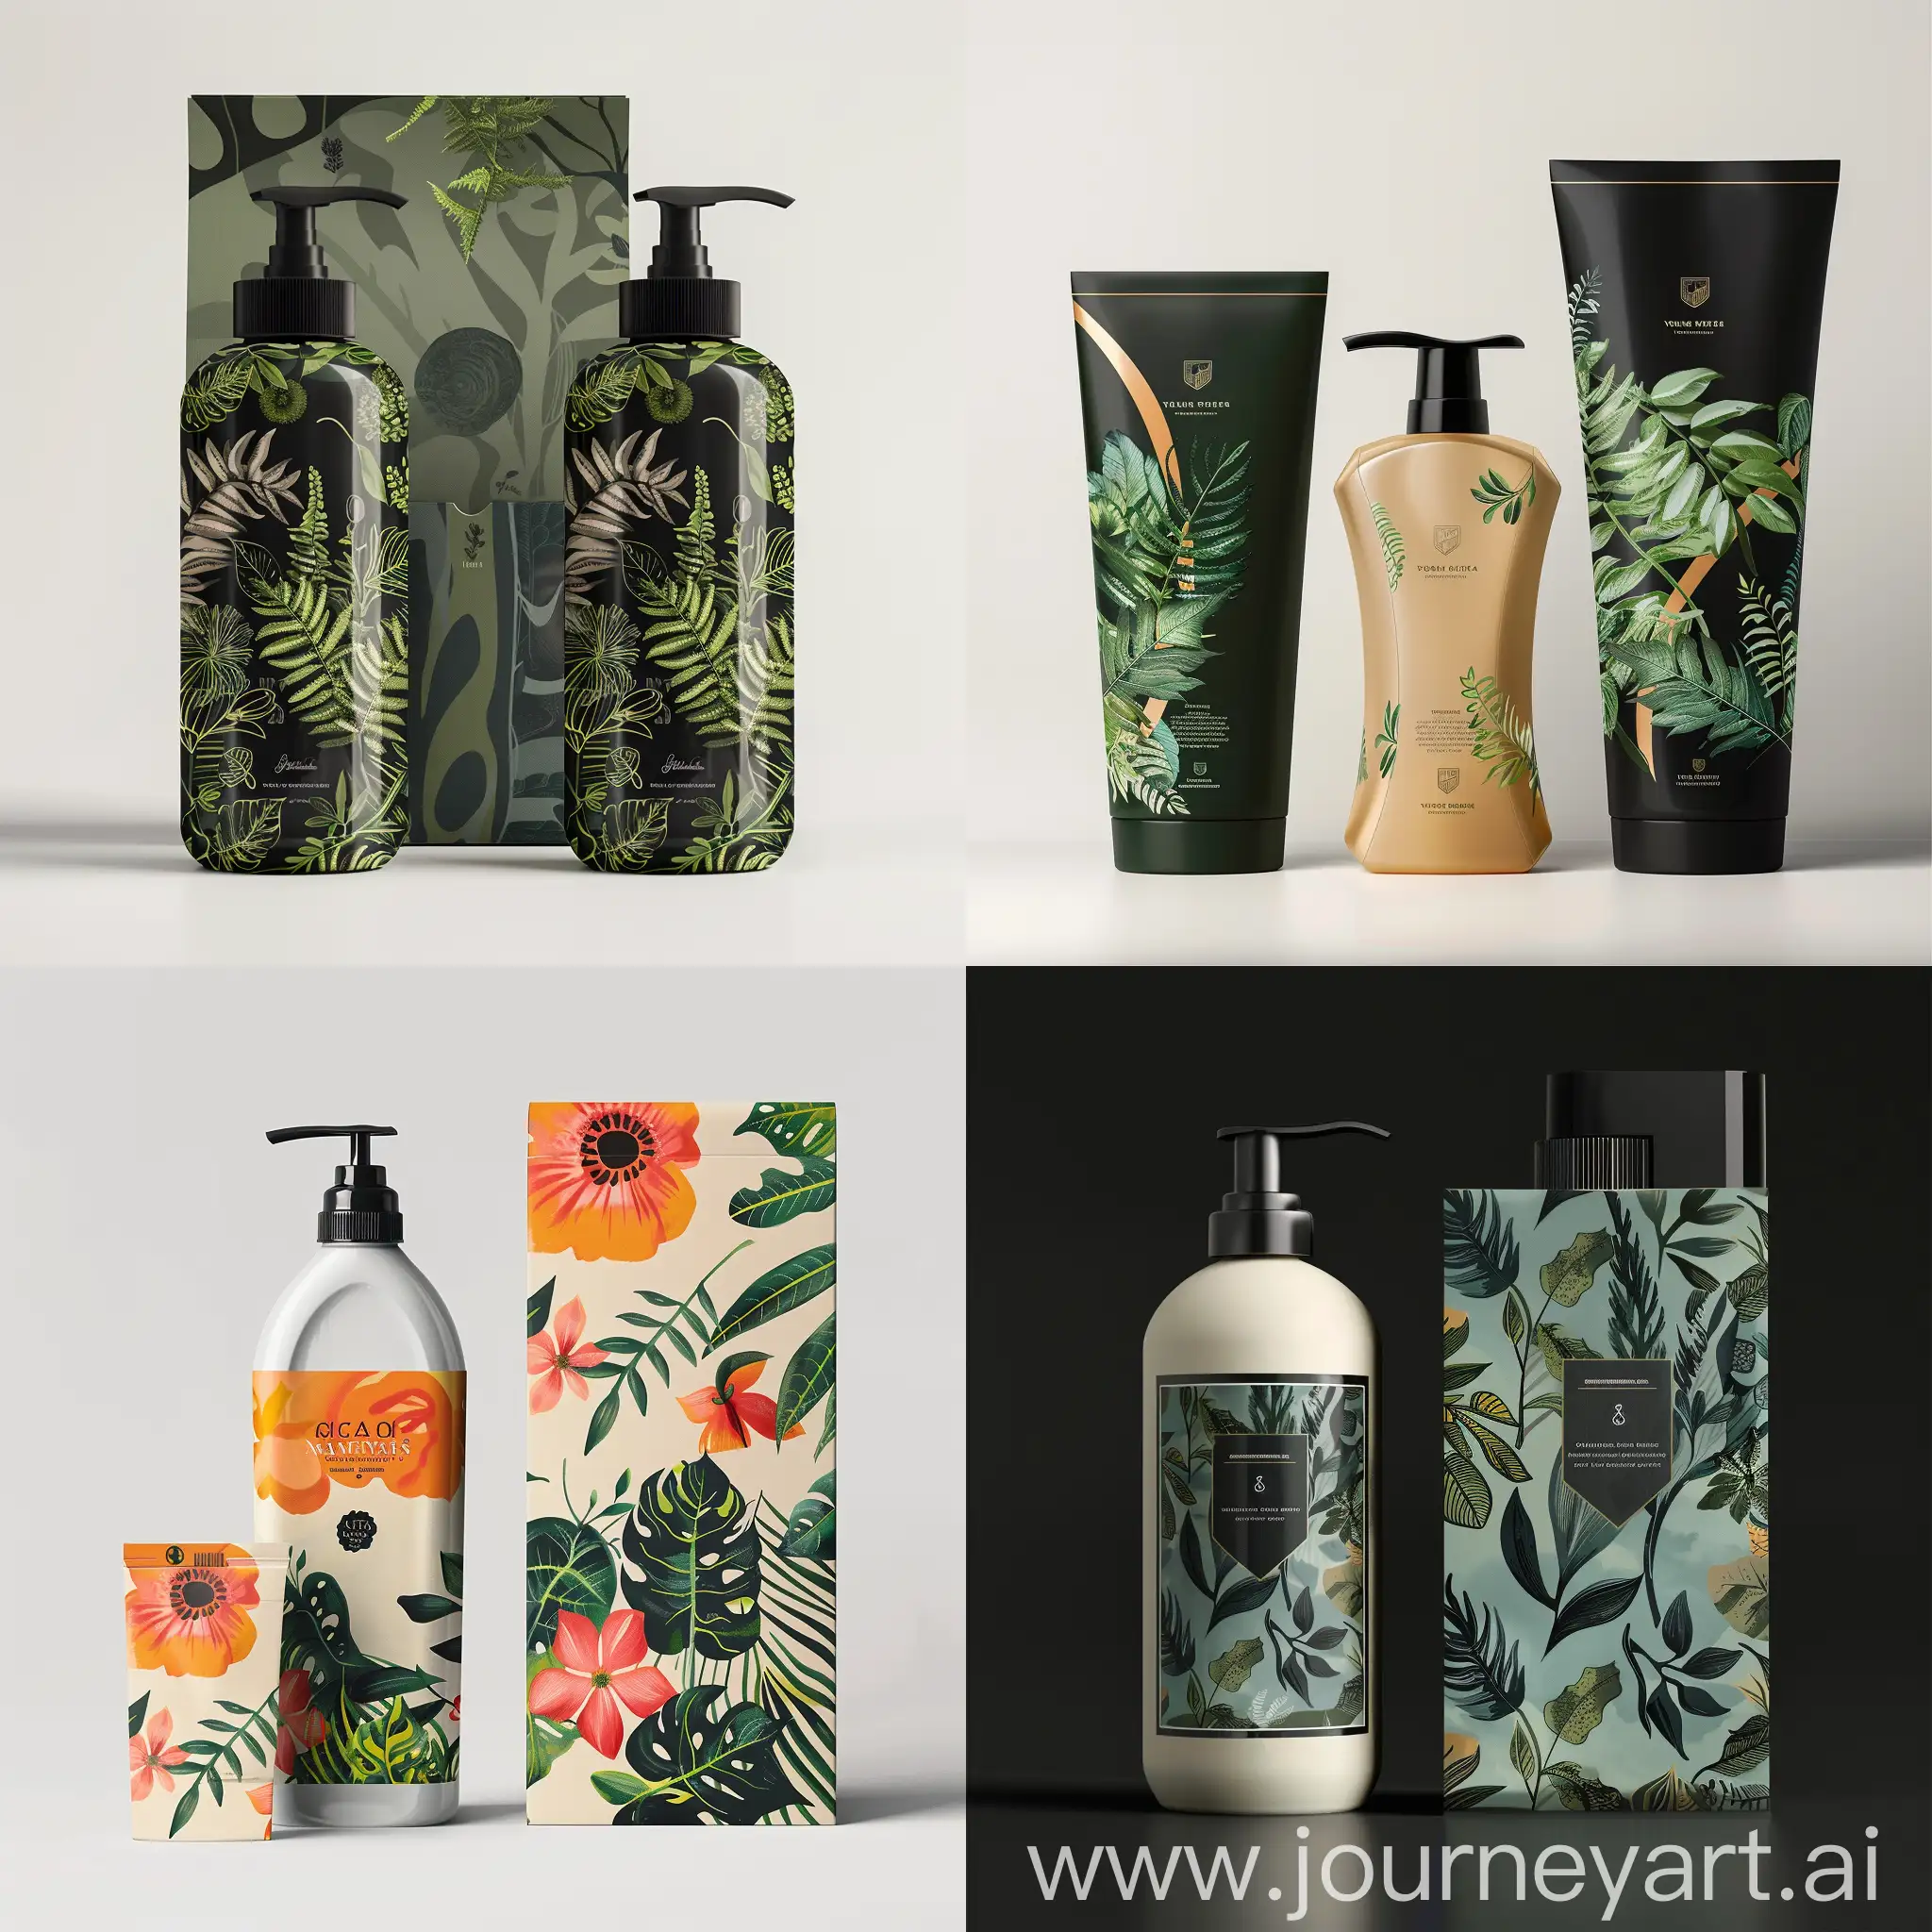 Premium-Class-Gel-Shower-and-Shampoo-Packaging-with-NatureInspired-Modern-Graphics